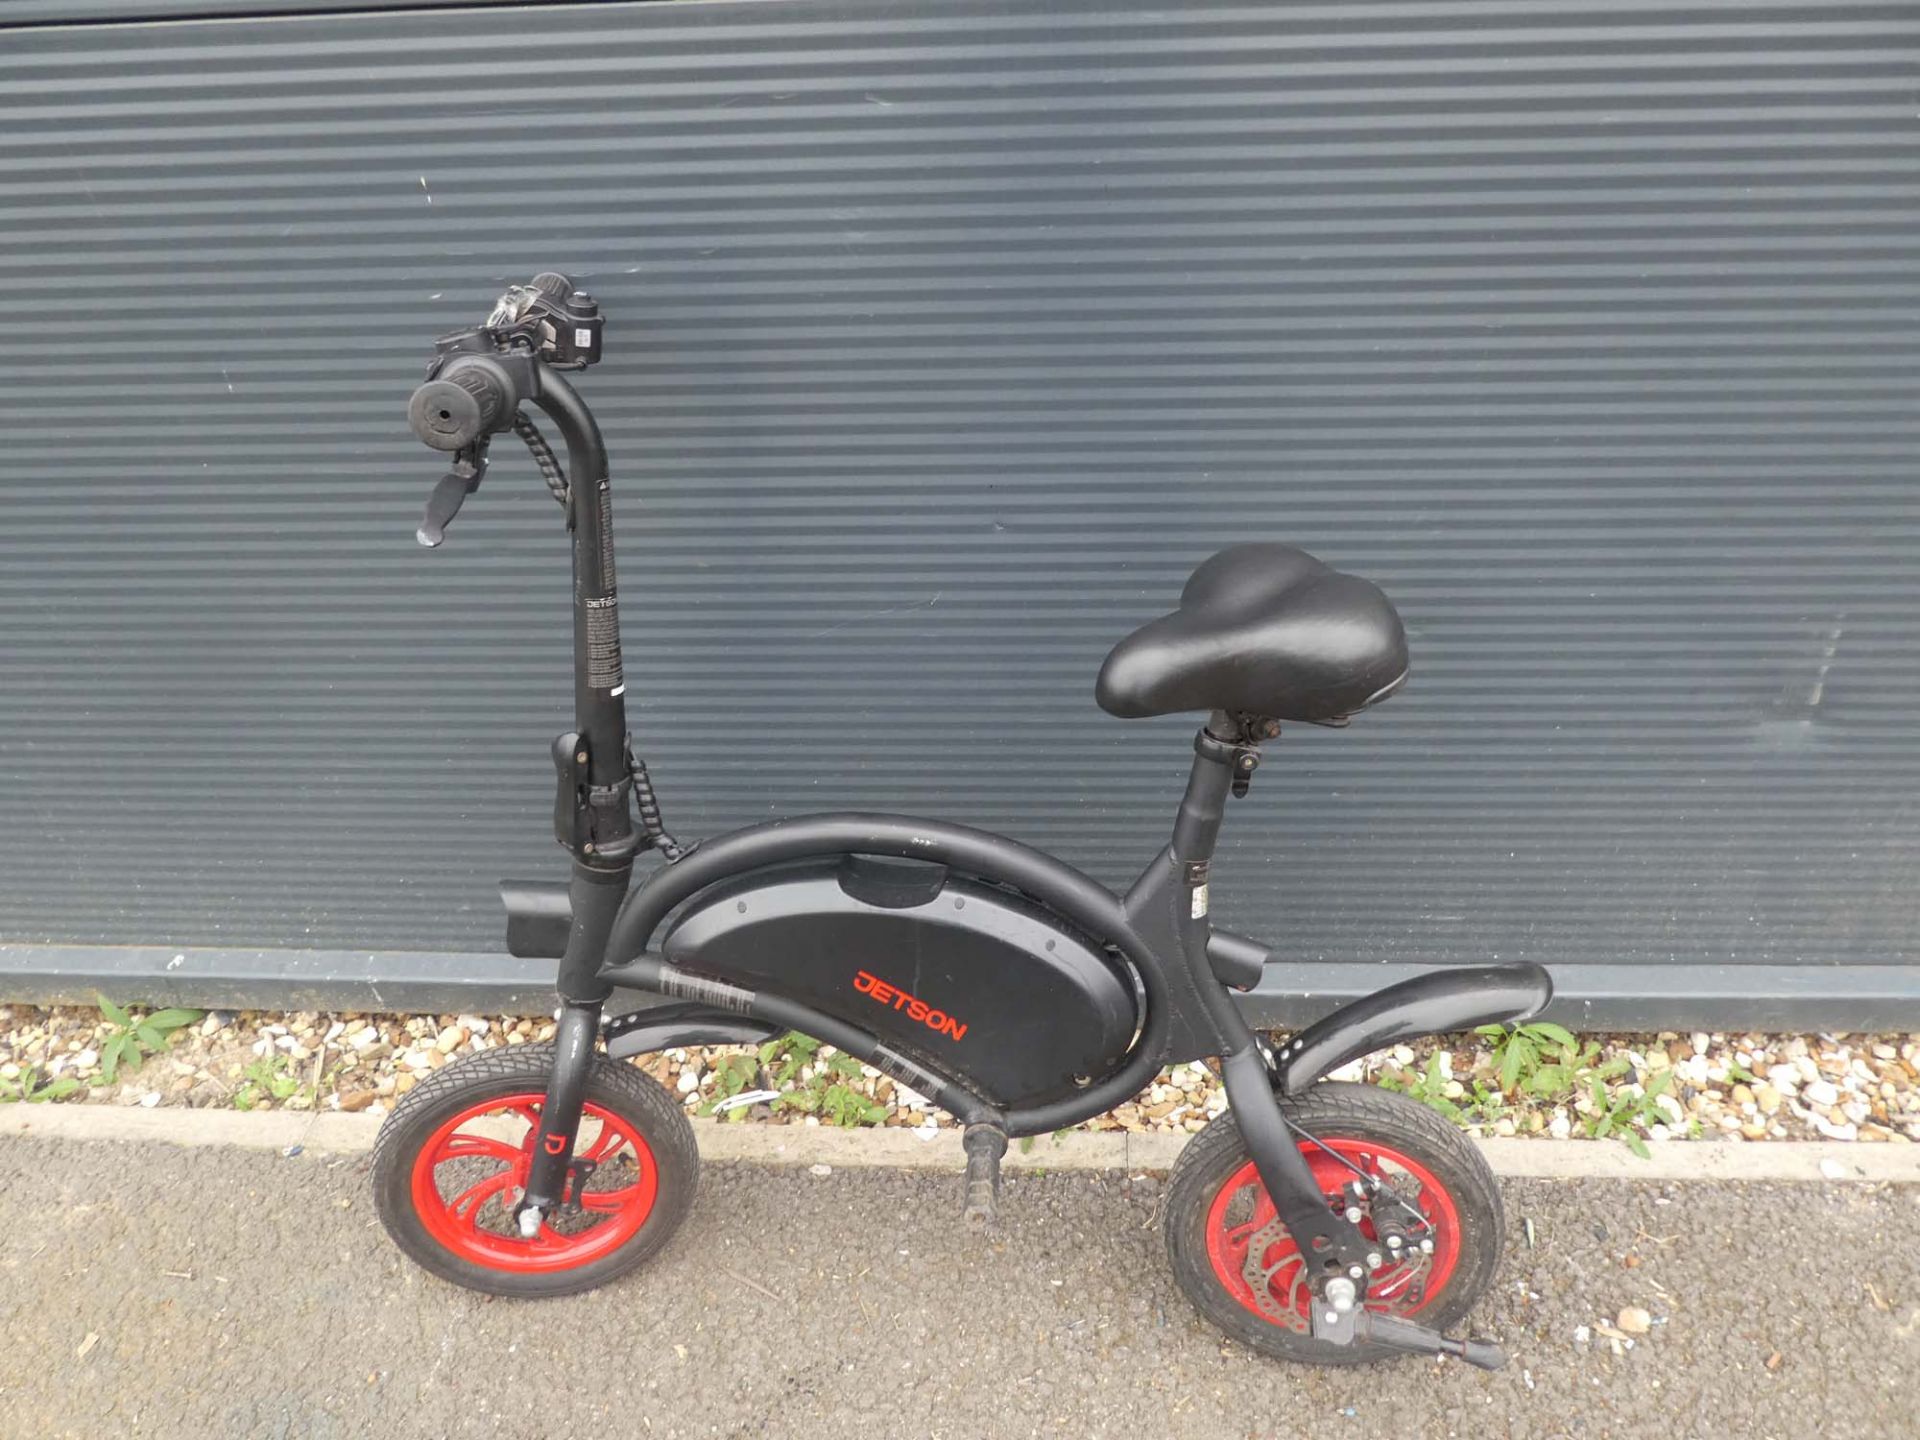 Small Jetson red electric bike